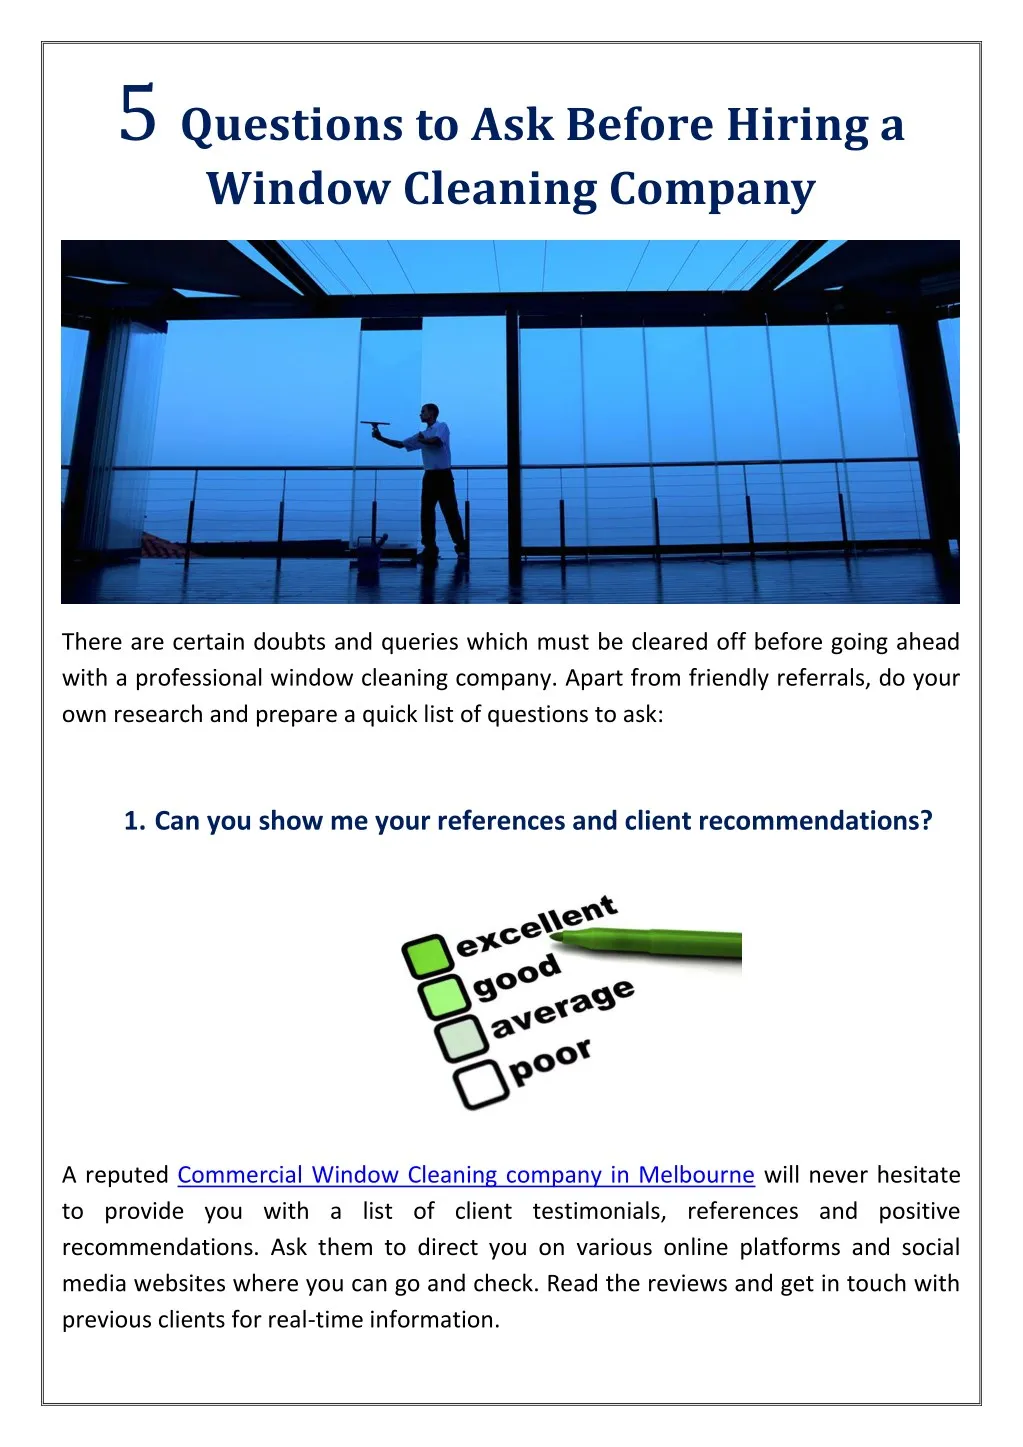 5 questions to ask before hiring a window